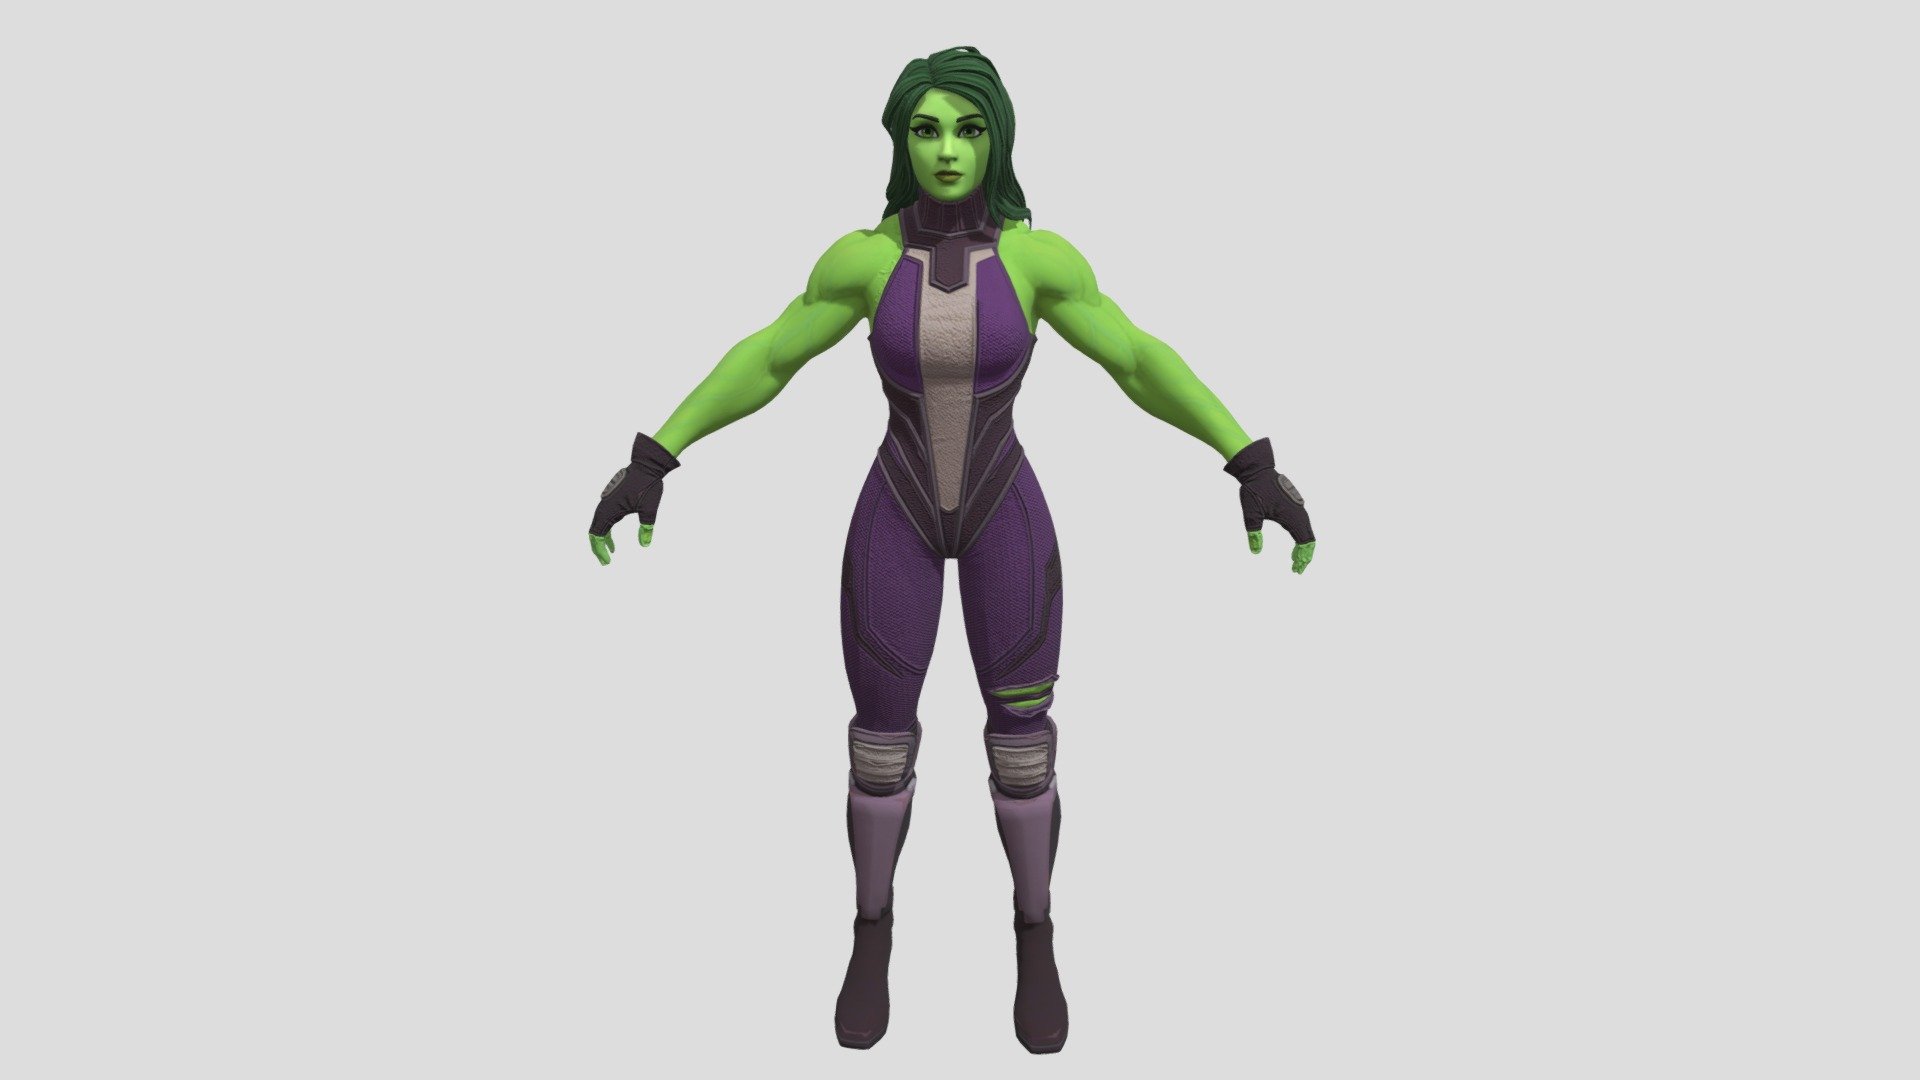 Fortnite: She Hulk Original 3D Model by Epic Games from Fortnite free download for Unity and Unreal Engine!!!!!!!!!!!!!!!!!!

My Code Creator in Fortnite: TEAMEW - Fortnite: She Hulk - Download Free 3D model by EWTube0 3d model